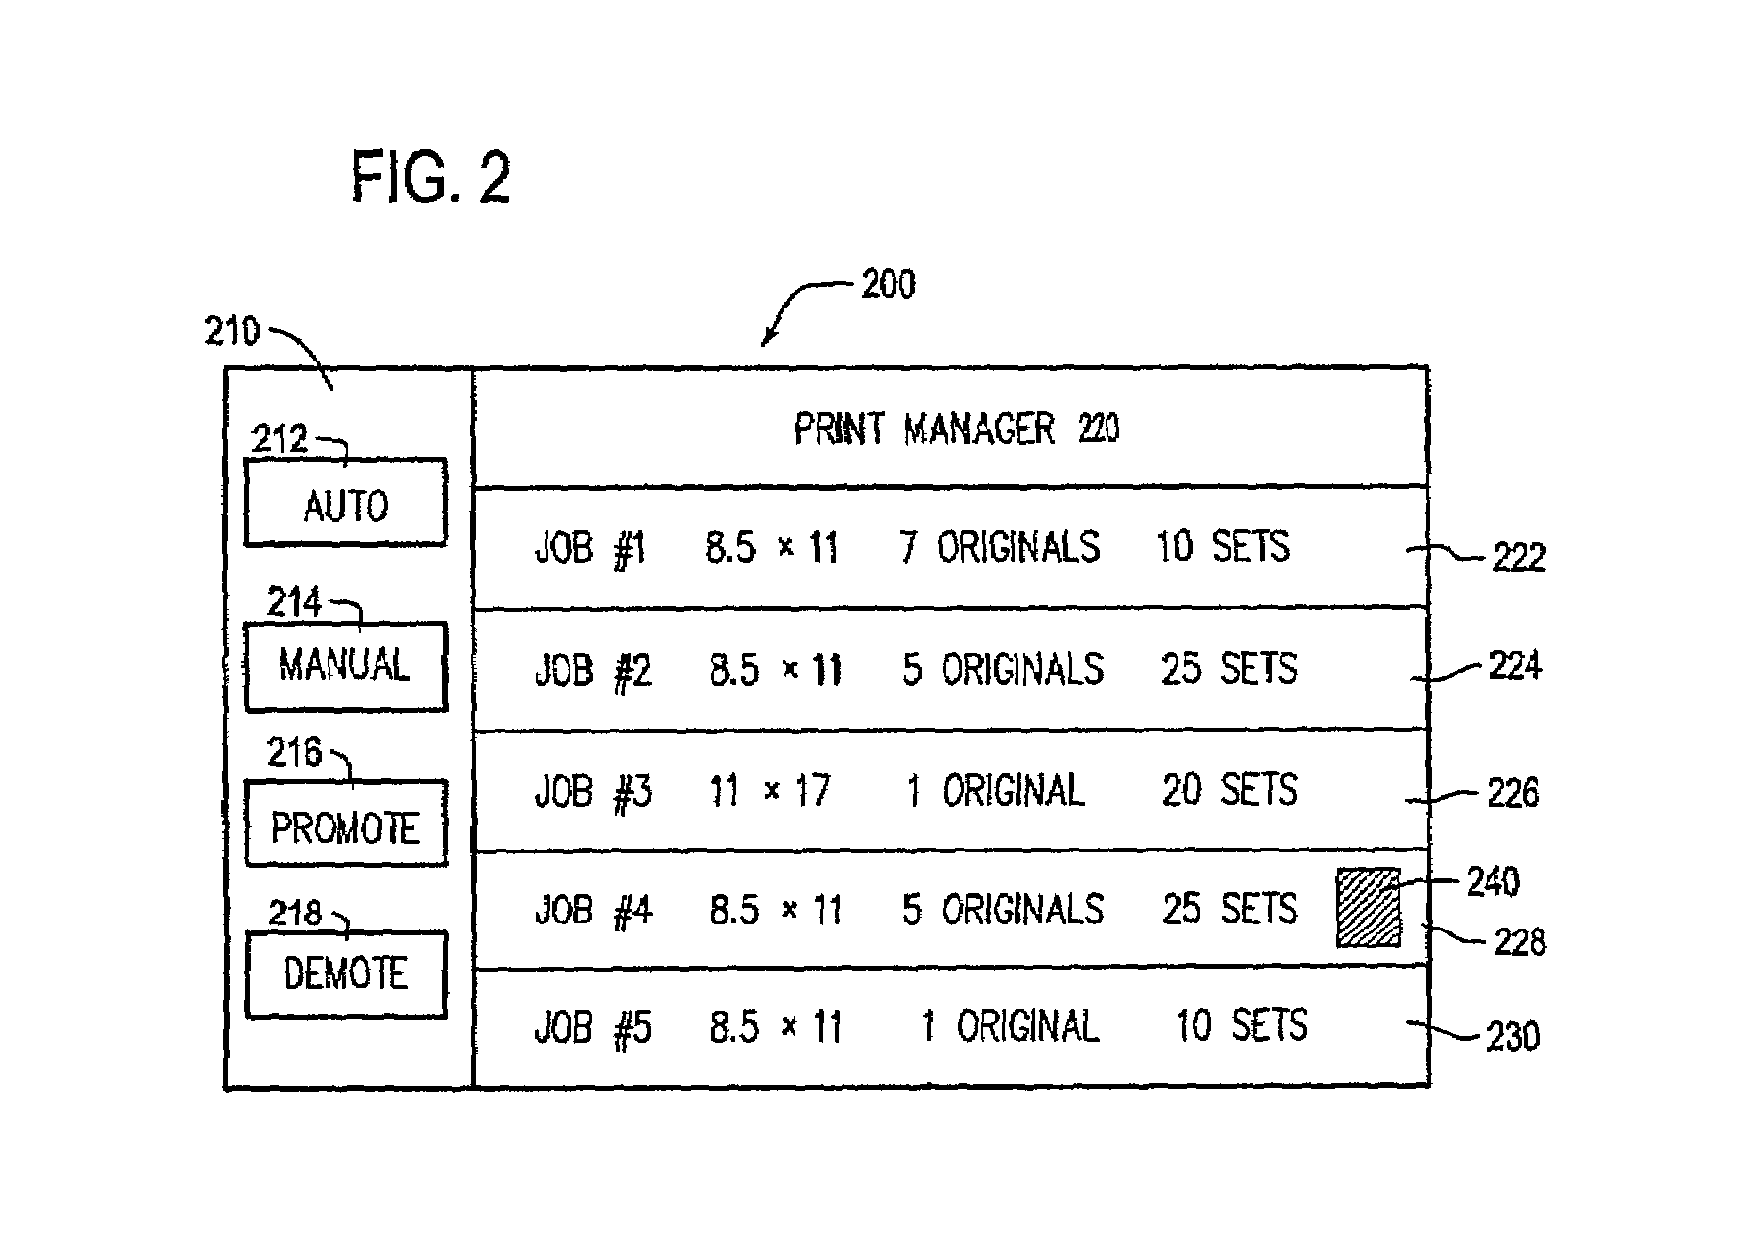 Systems and methods for controlling an image forming system based on customer replaceable unit status